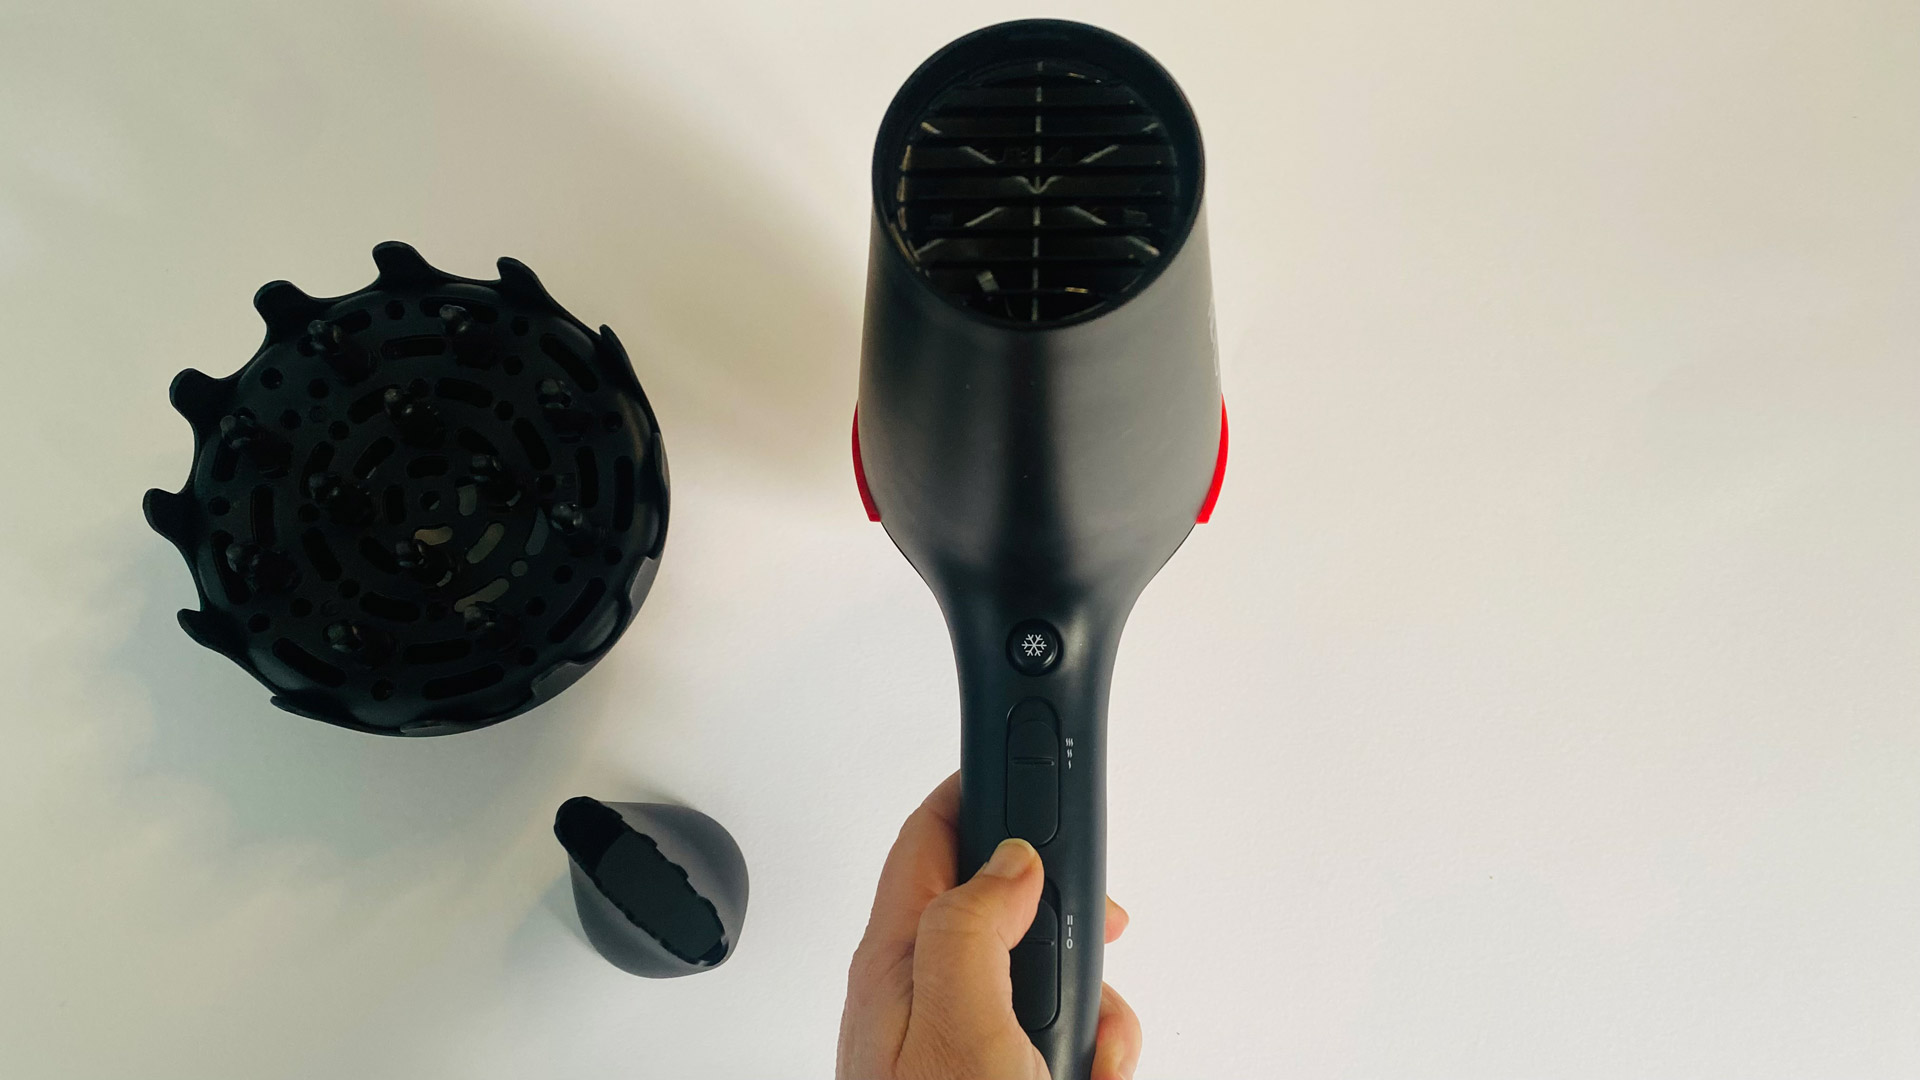 A hand holding the Revlon SmoothStay Coconut-Oil Infused Hair Dryer with accessories on show